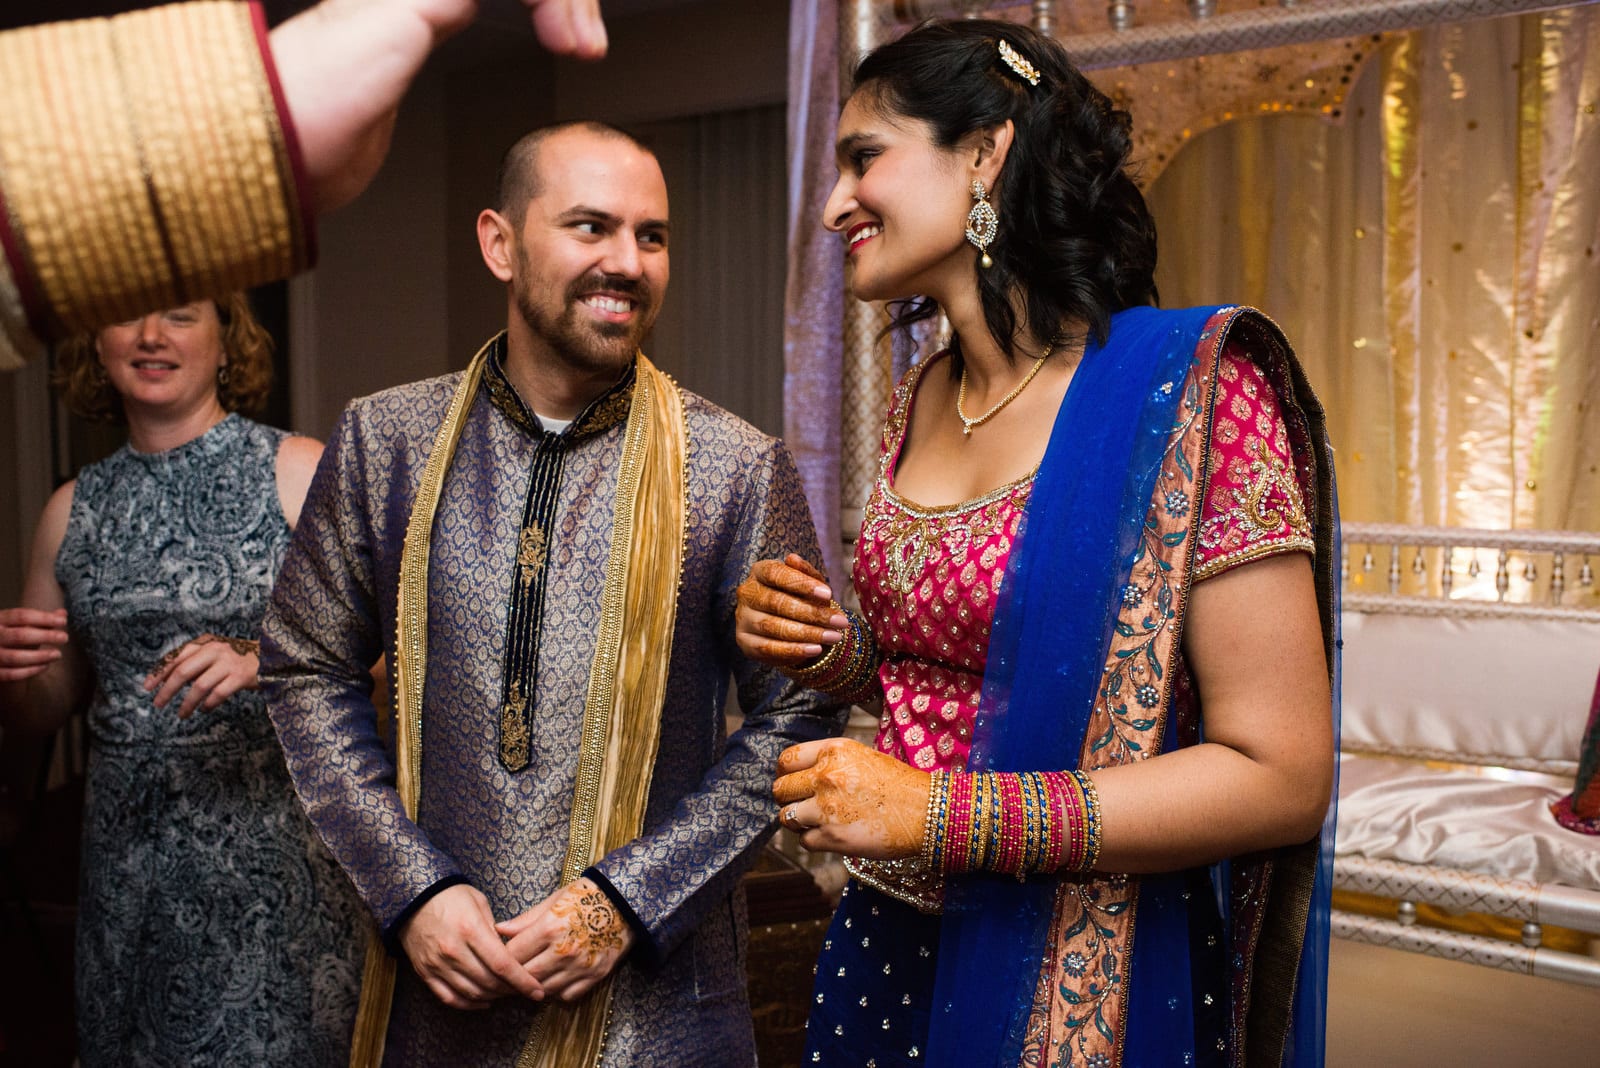 A bride and groom link arms as they dance wearing traditional Indian clothing during their Renaissance Phipps South Asian Wedding.